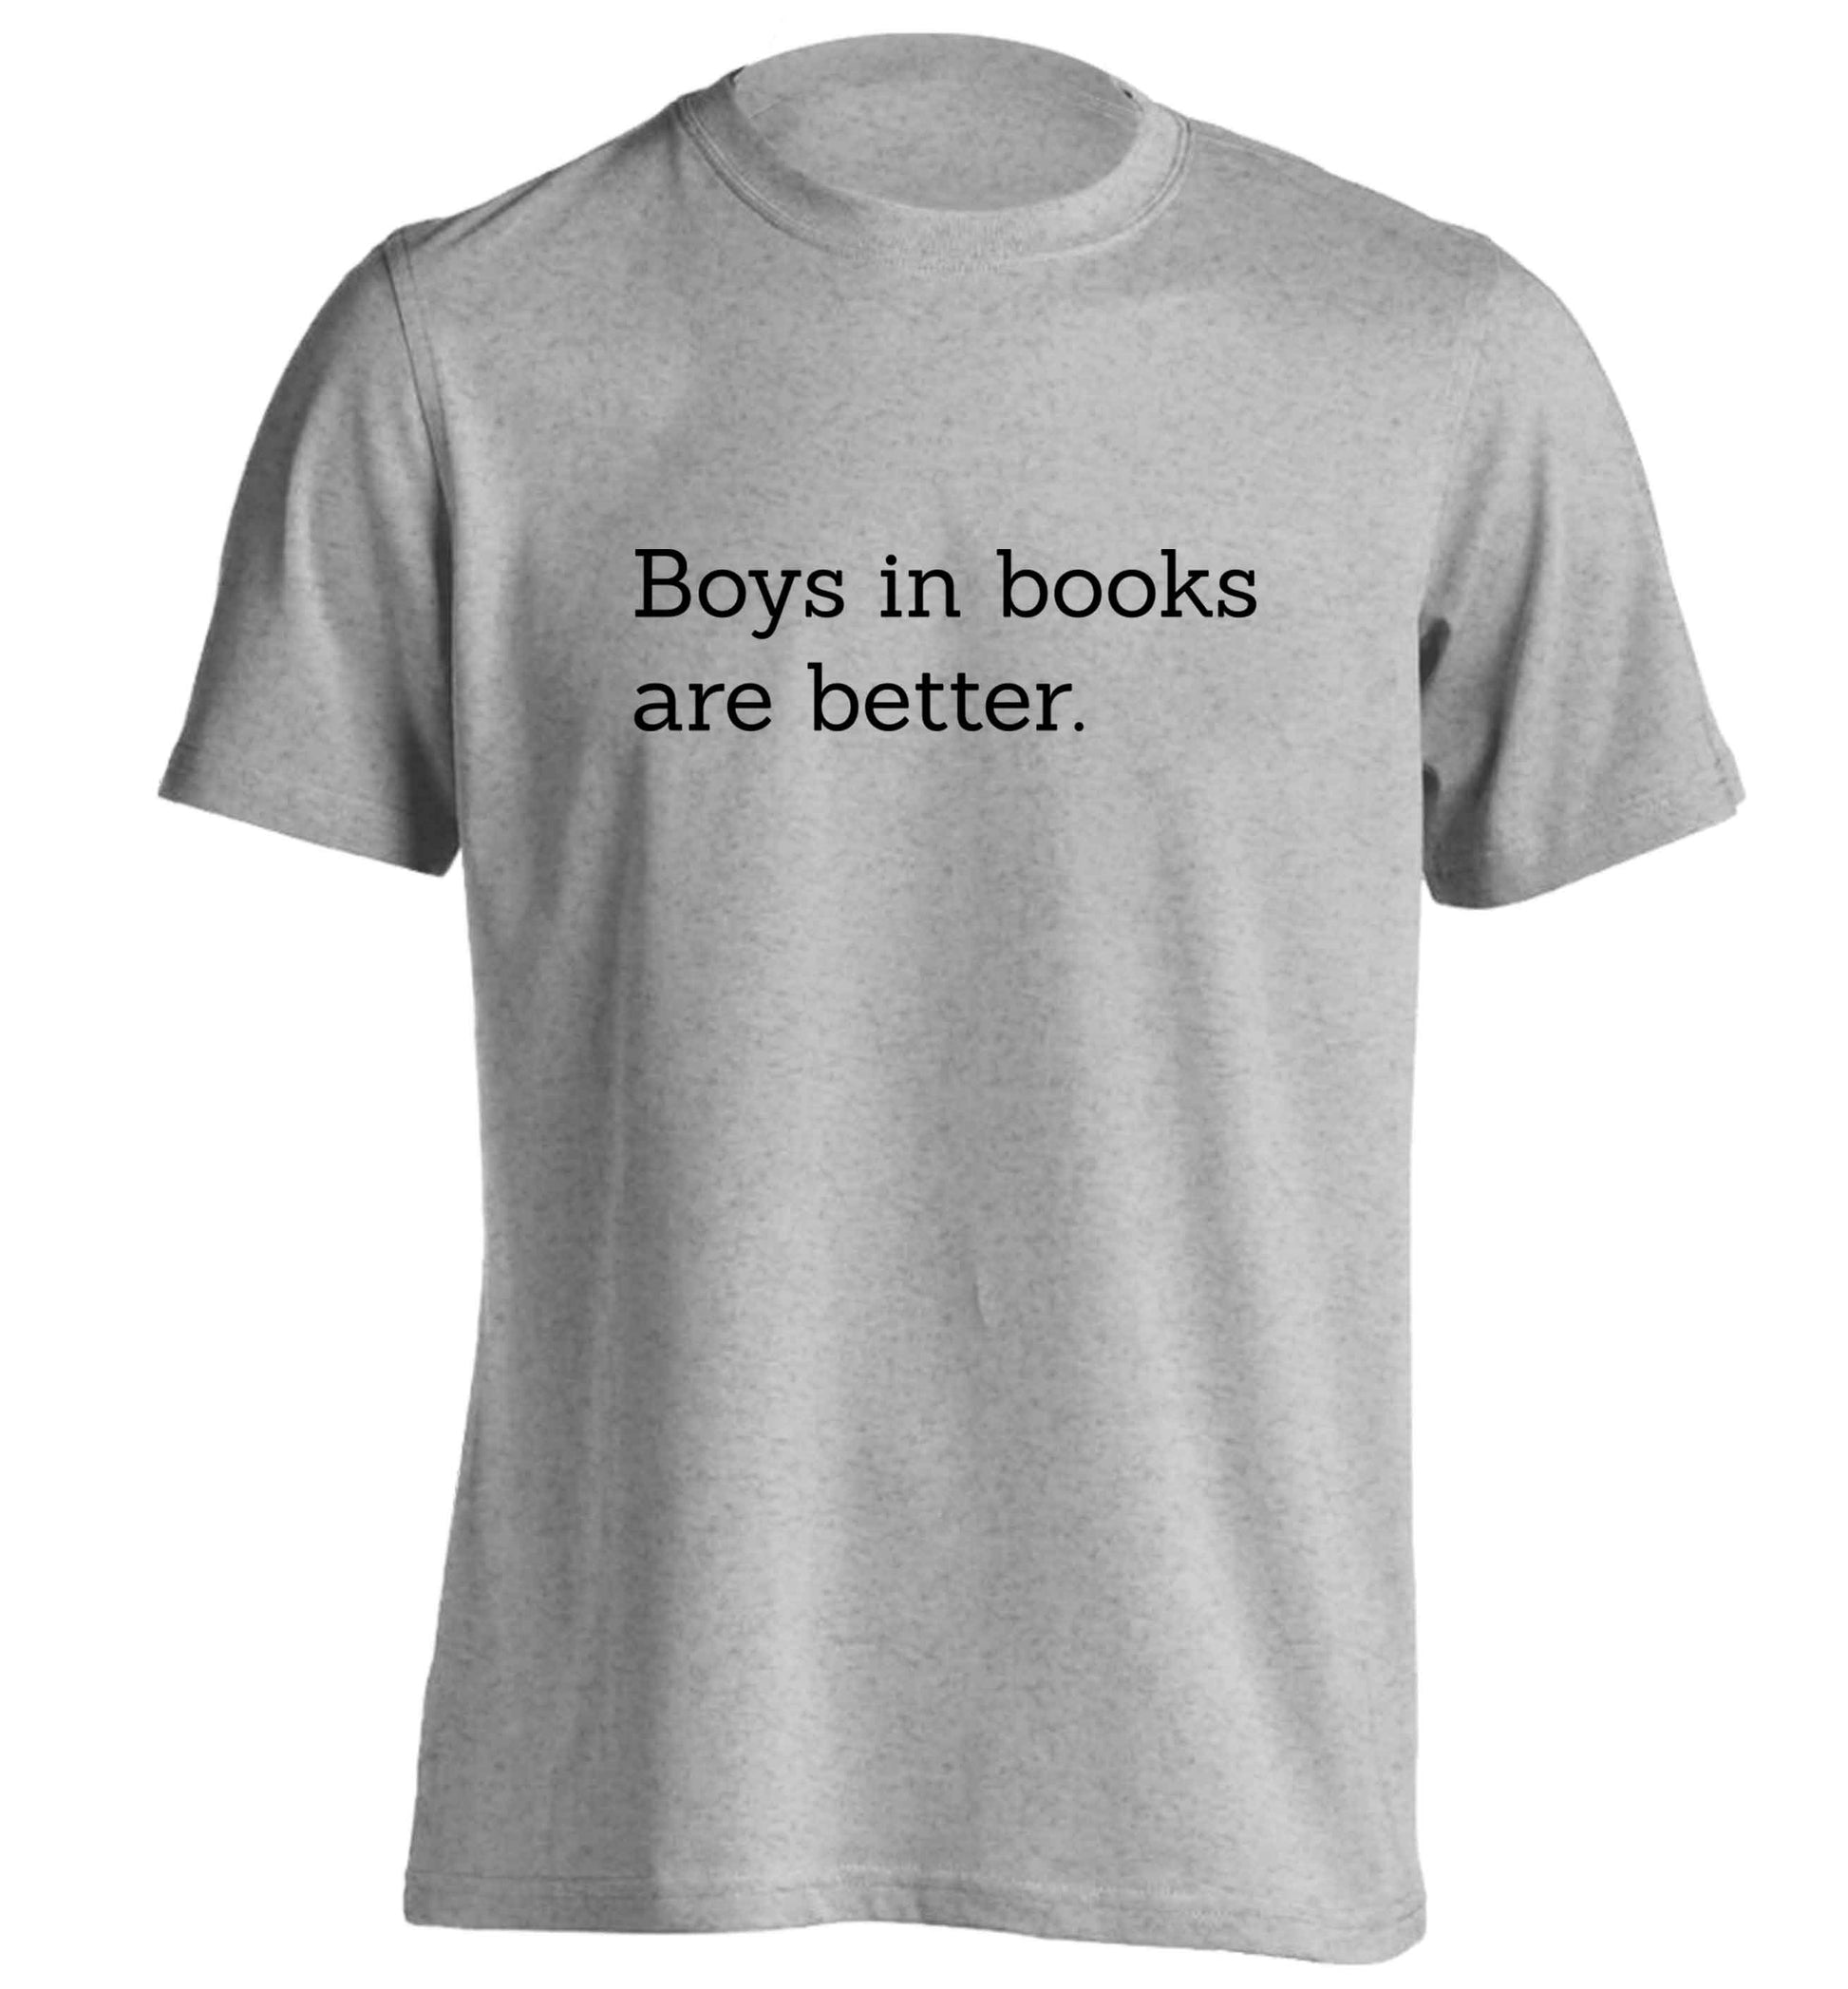 Boys in books are better adults unisex grey Tshirt 2XL